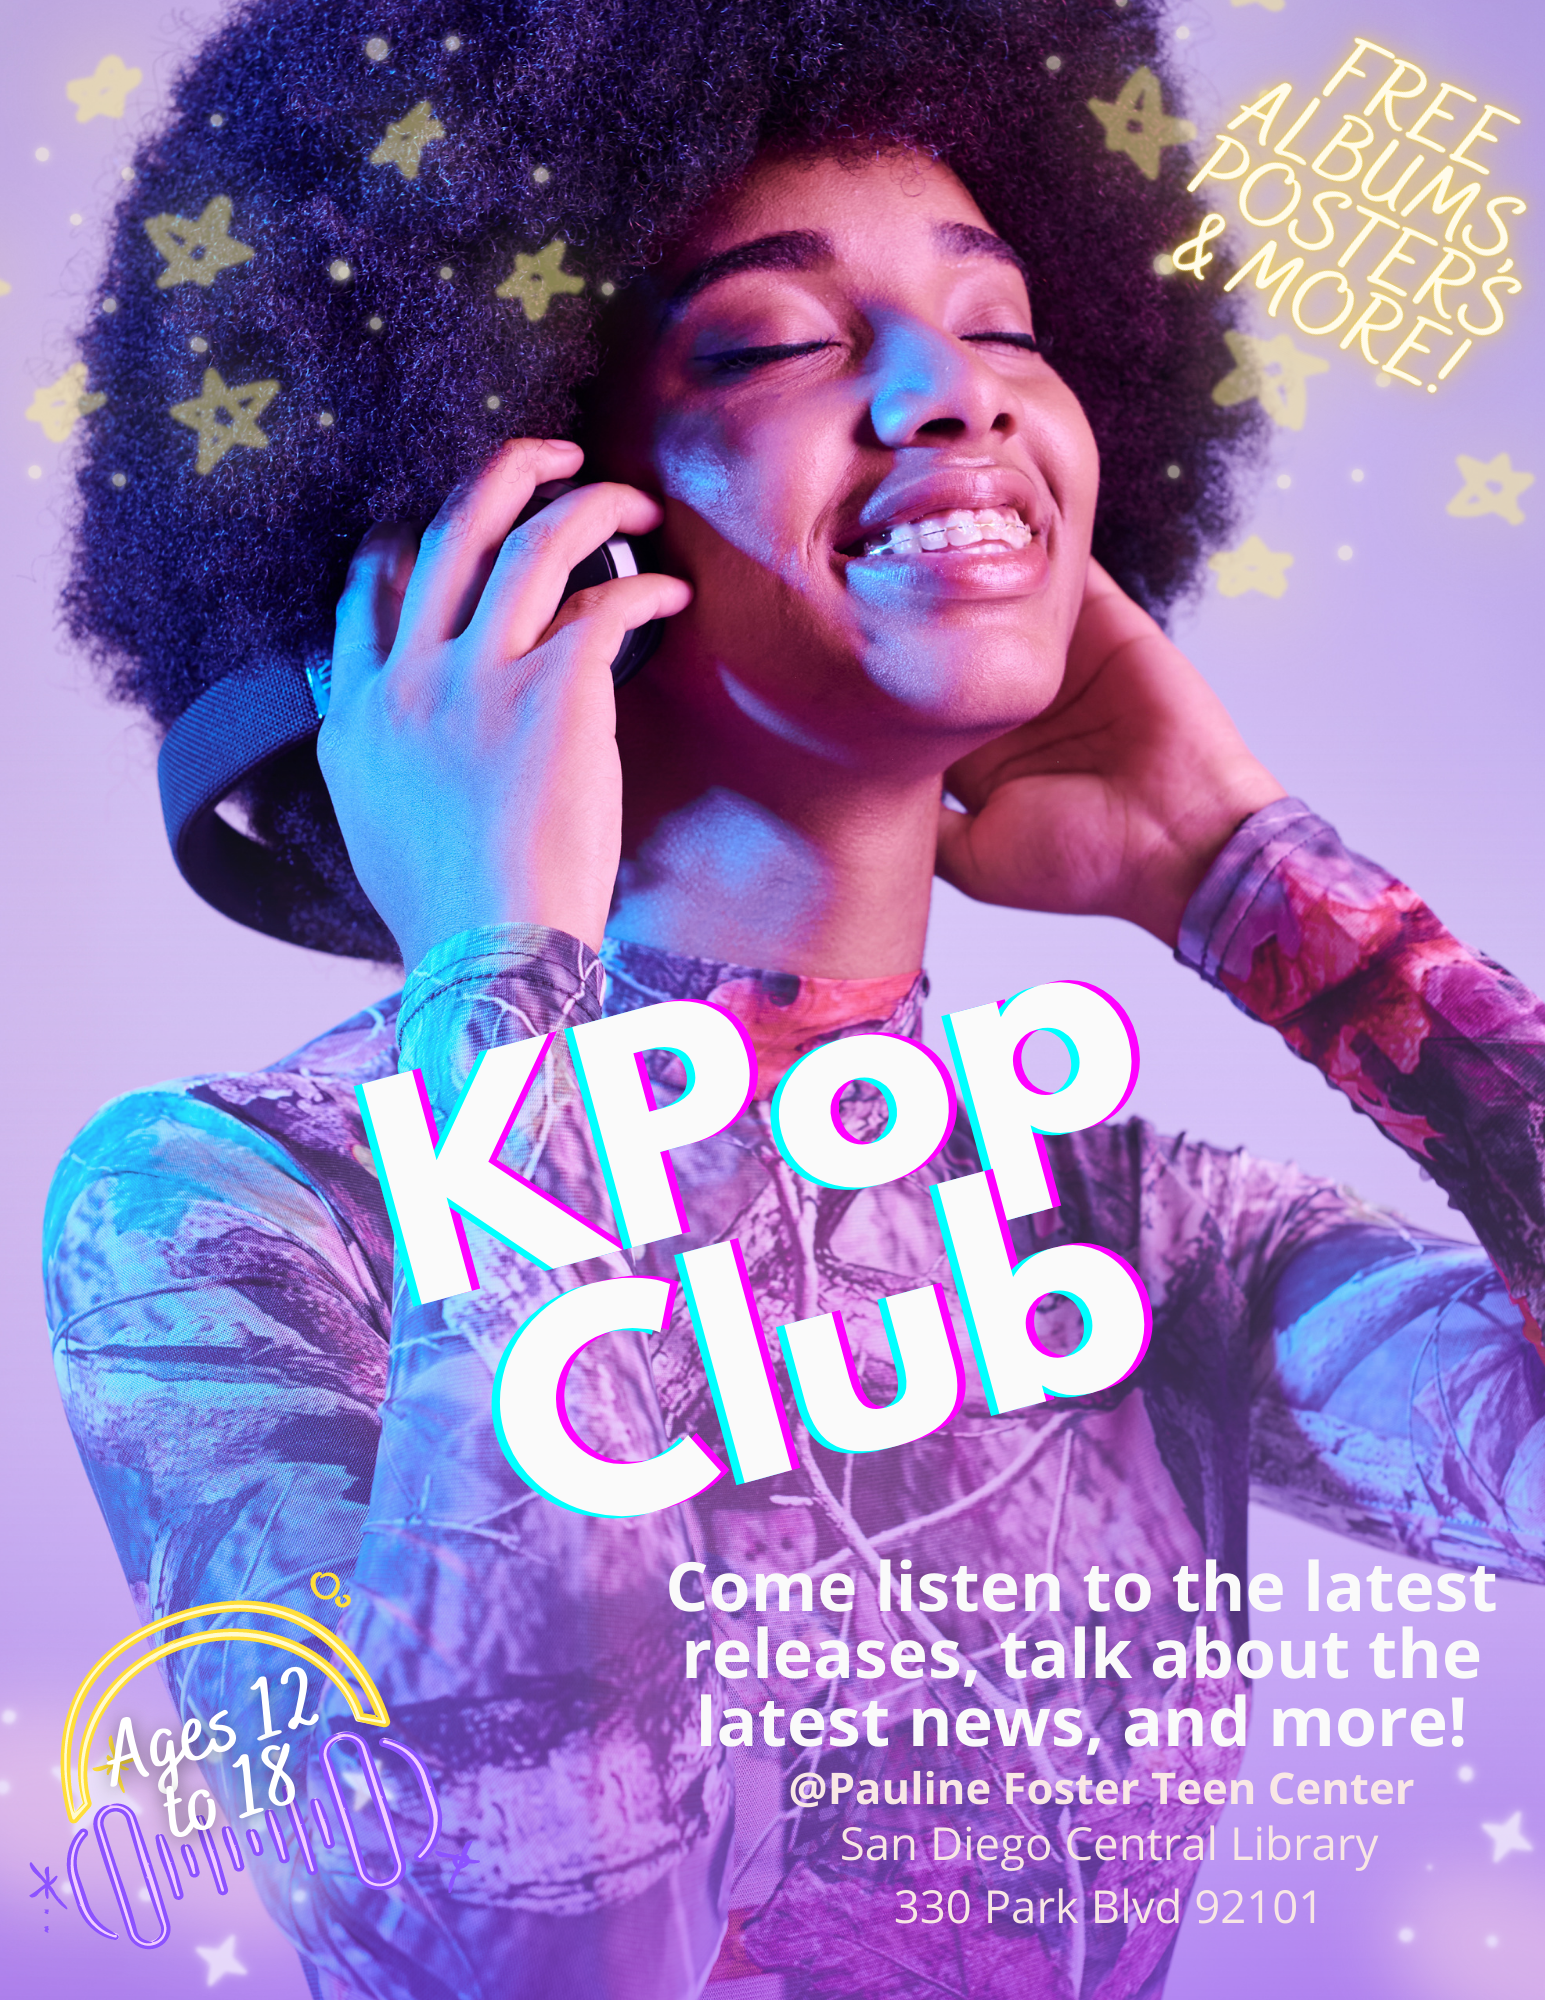 Come listen to the latest releases, talk about the latest news, and more! Free albums. Ages 12-18. @Pauline Foster Teen Center. San Diego Central Library, 330 Park Blvd. 92101.   